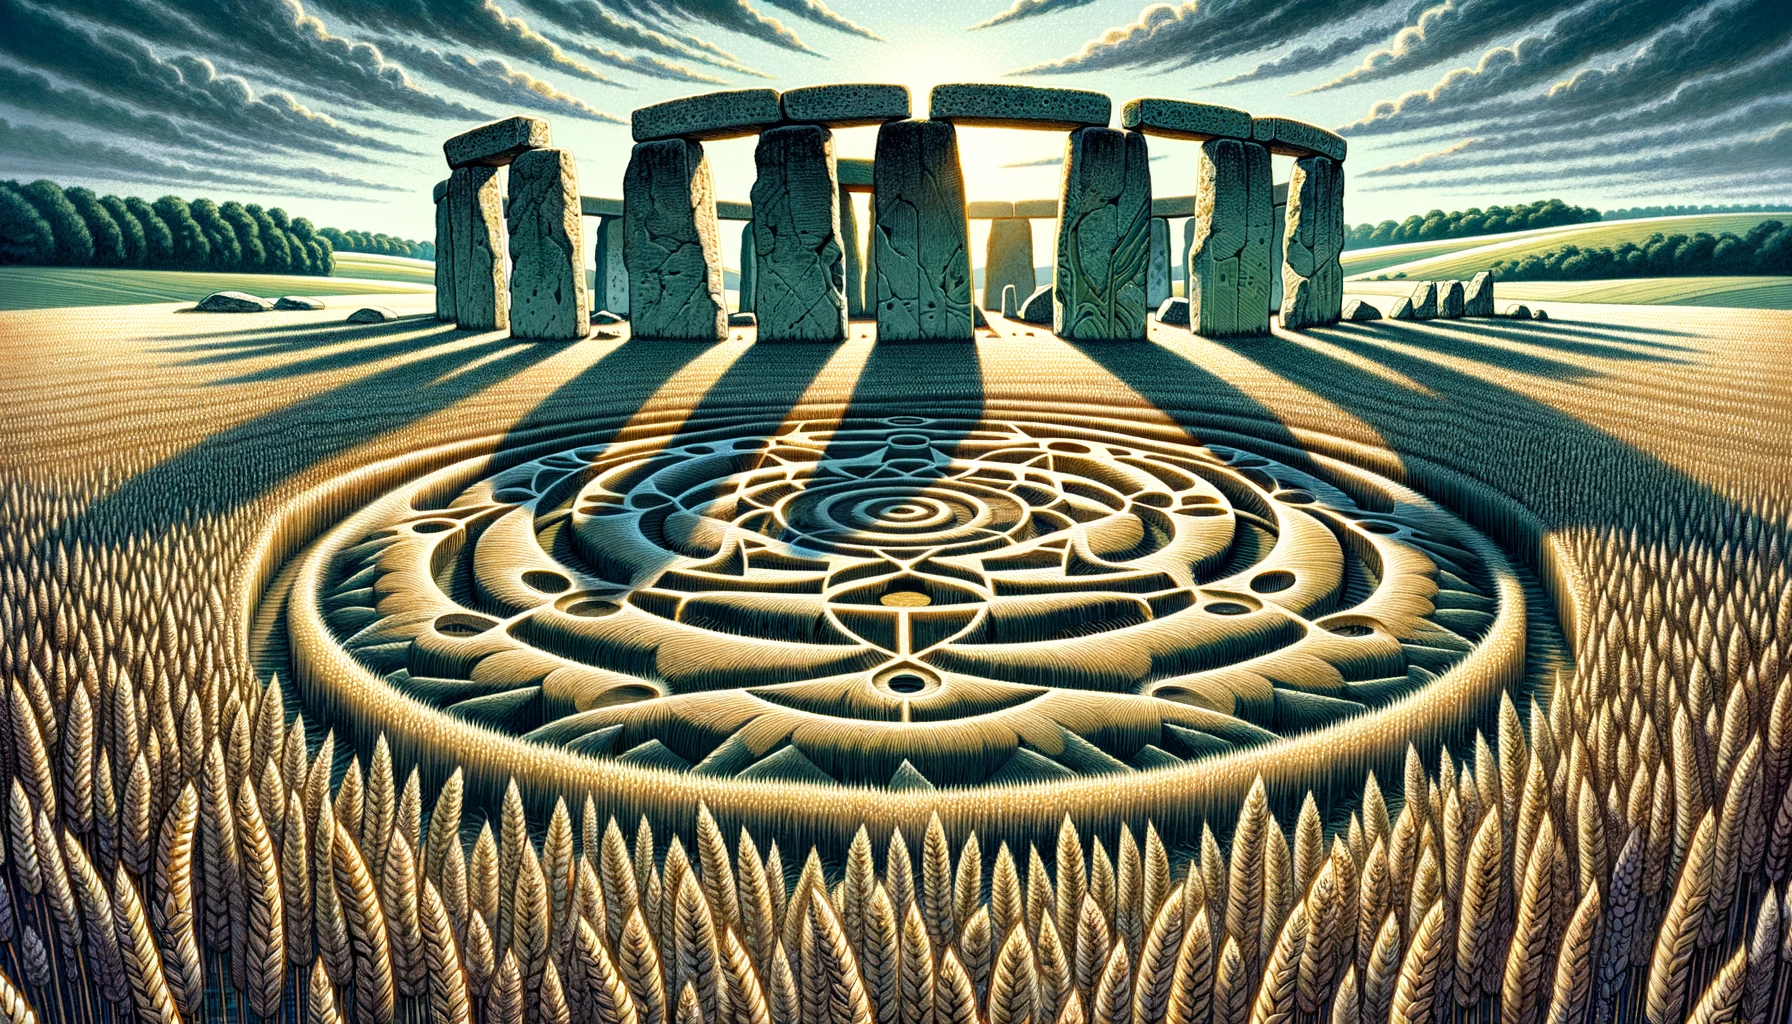 In 1996 a Mysterious Crop Circle Appeared Near Stonehenge